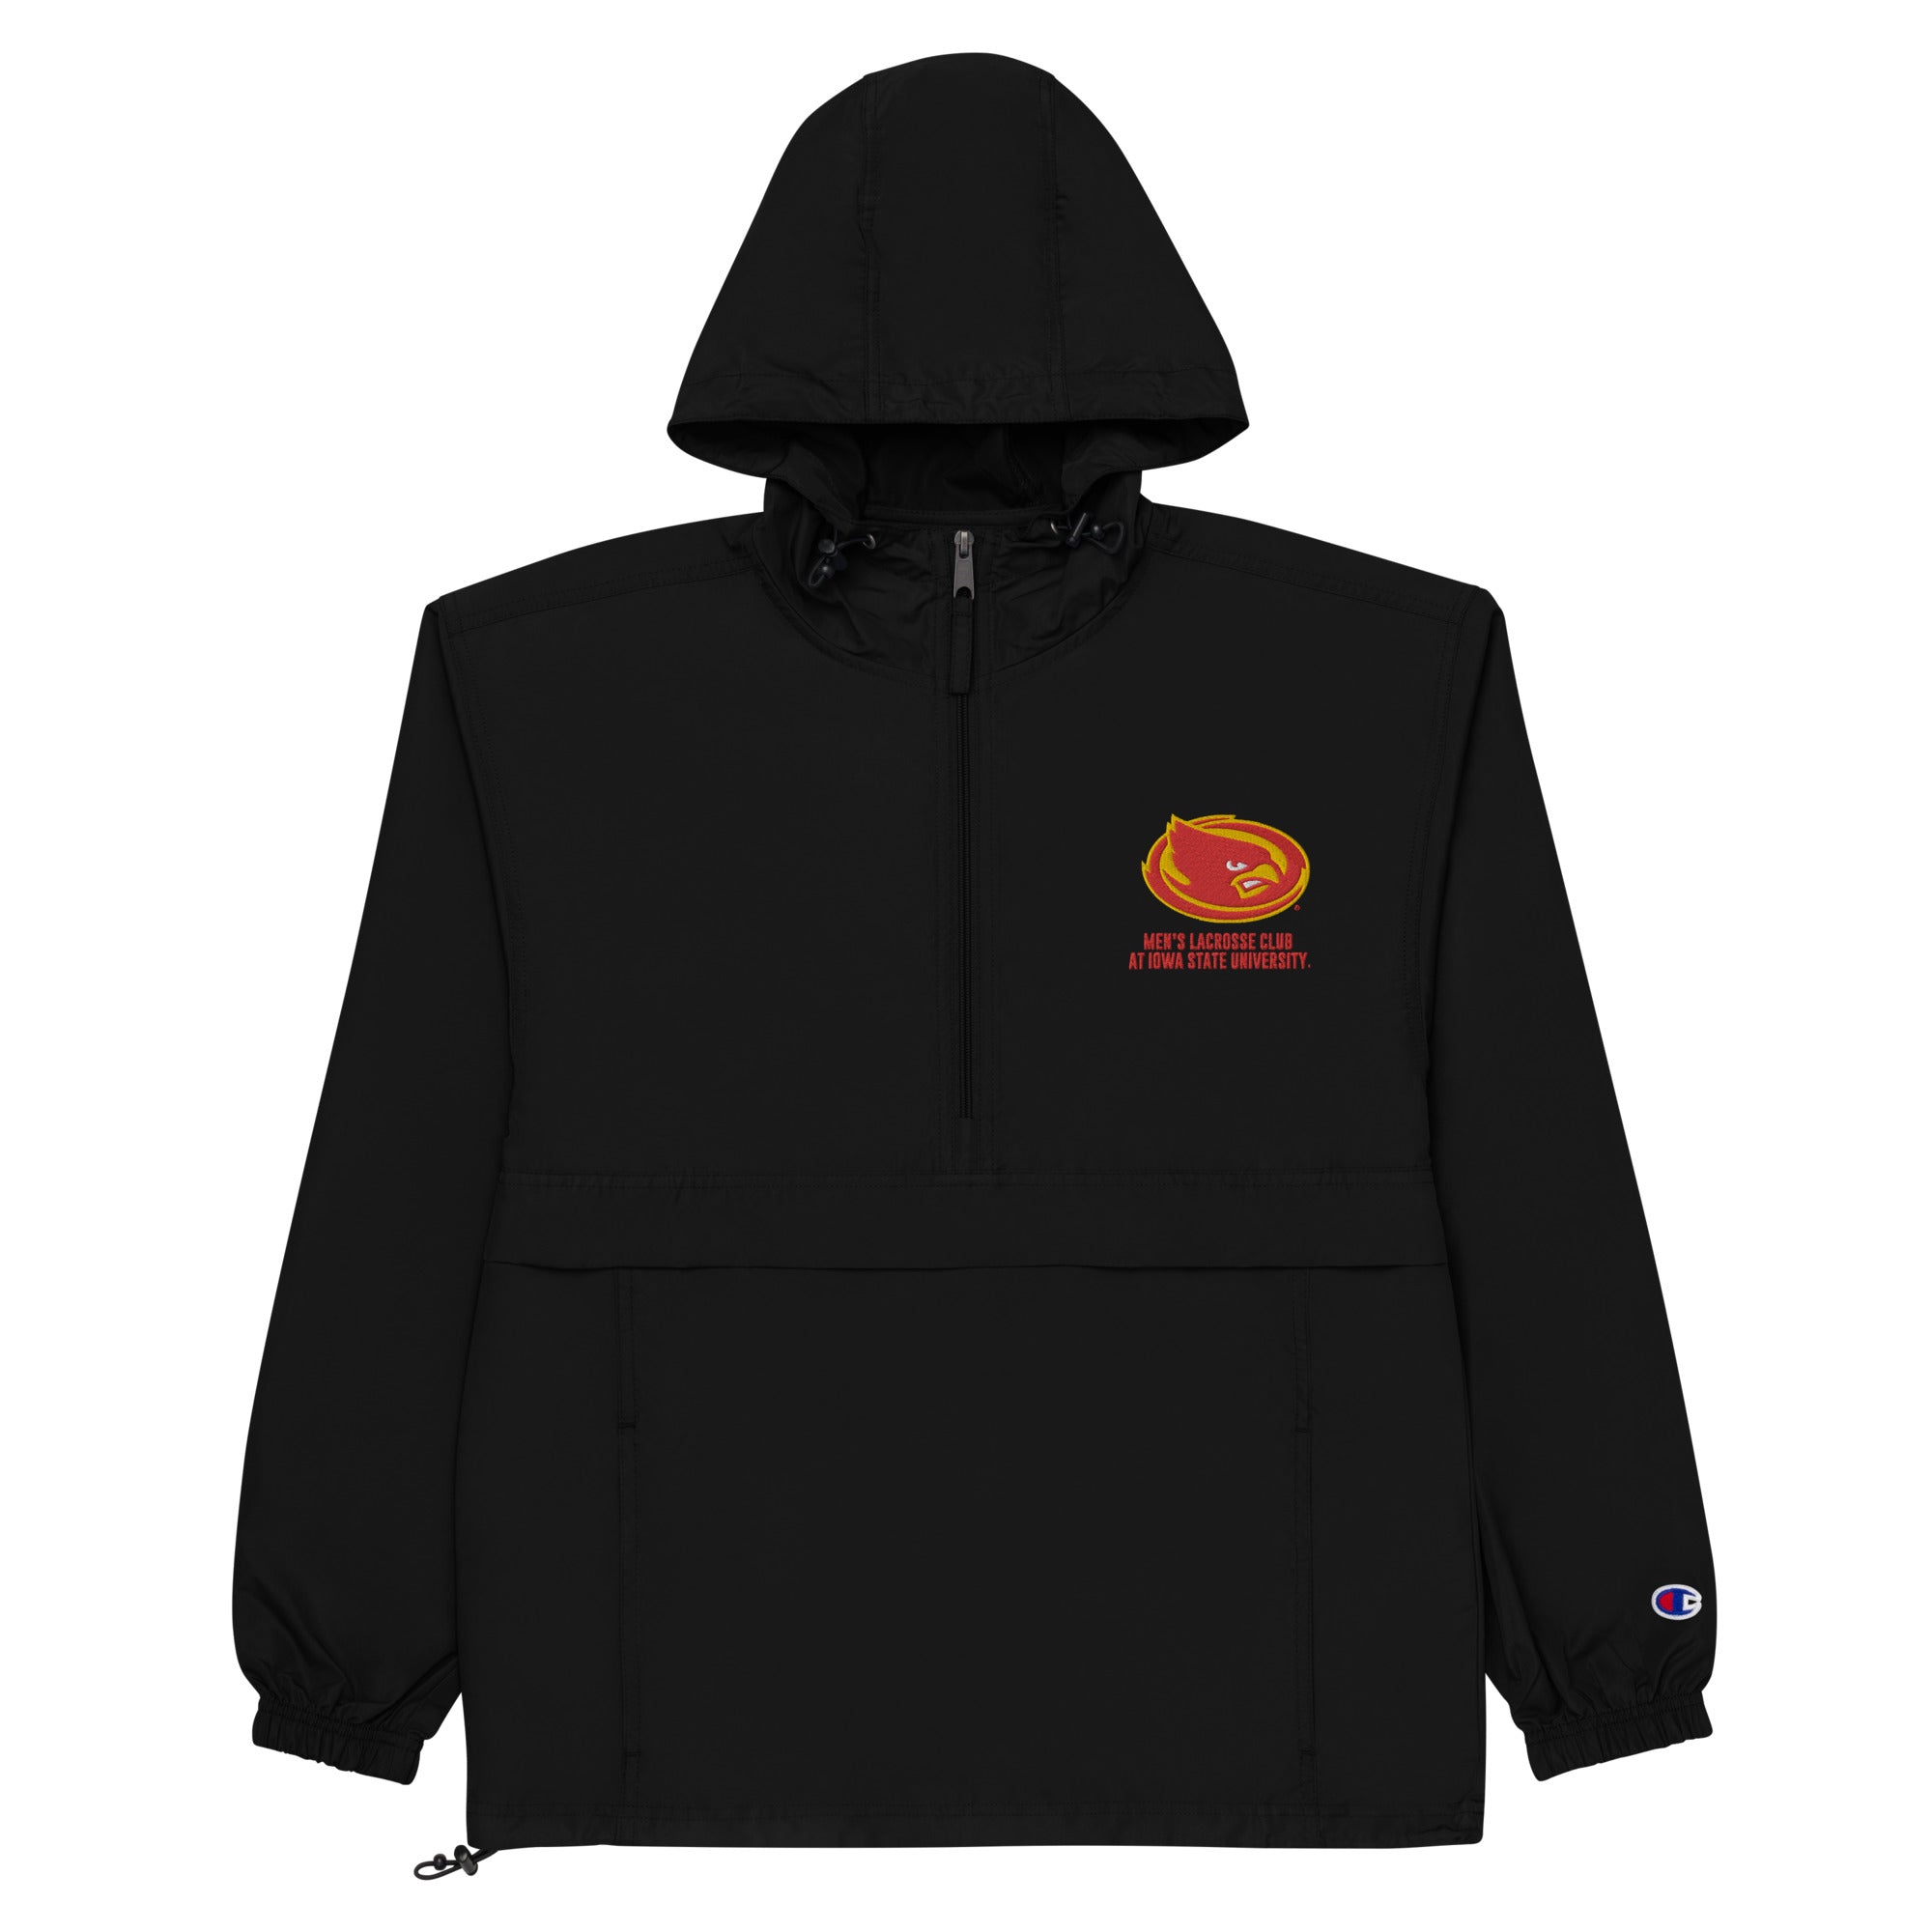 ISU Embroidered Champion Packable Jacket